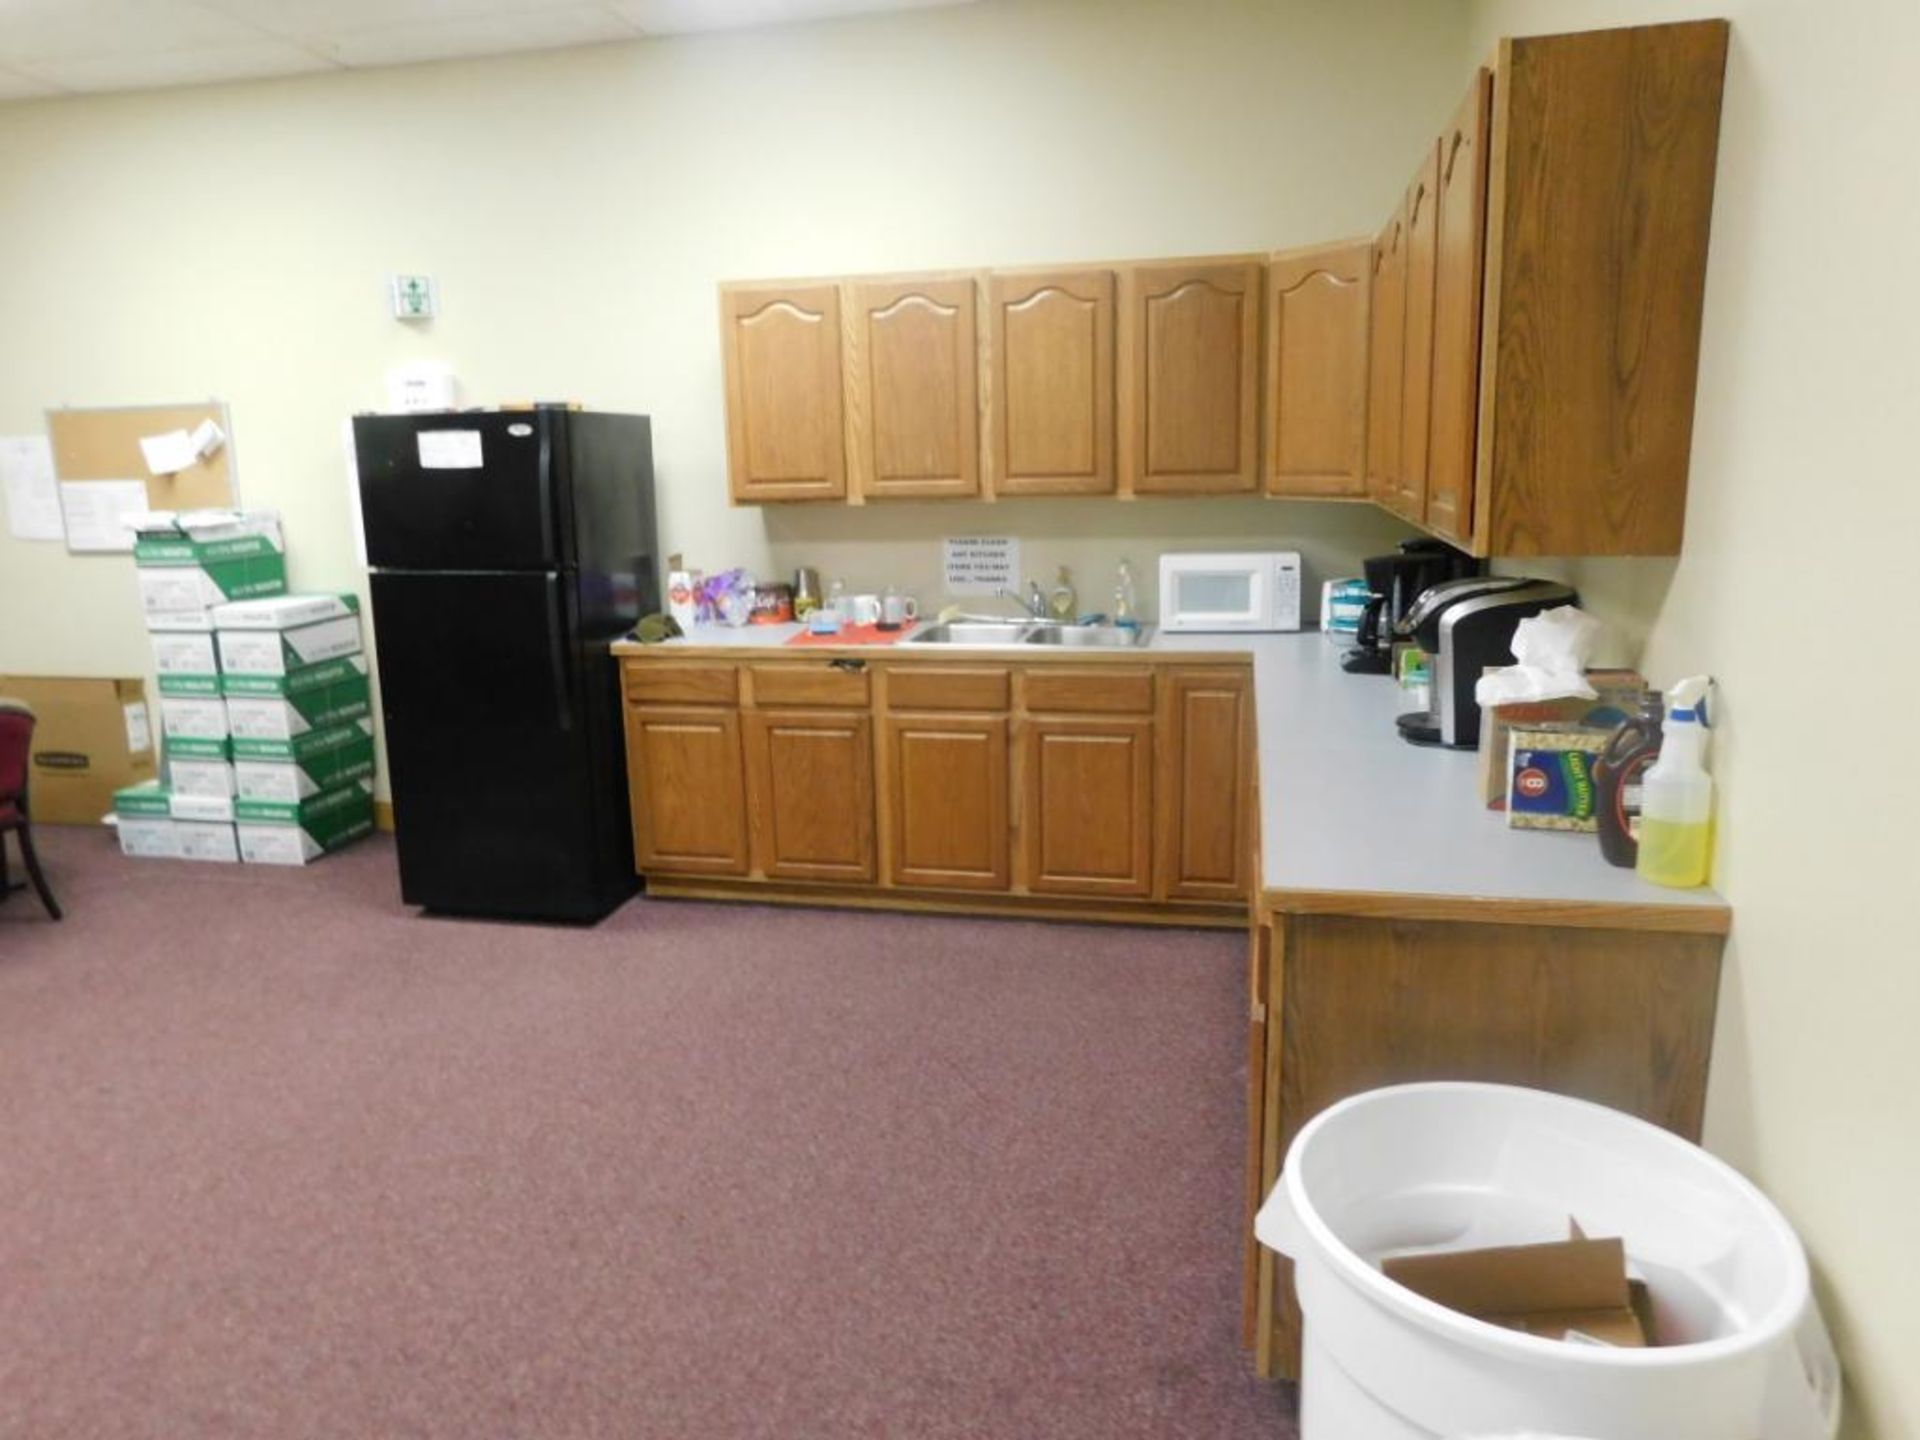 LOT: Contents of Break Room including Whirlpool Refrigerator, Microwave Oven, (3) Coffee Makers,